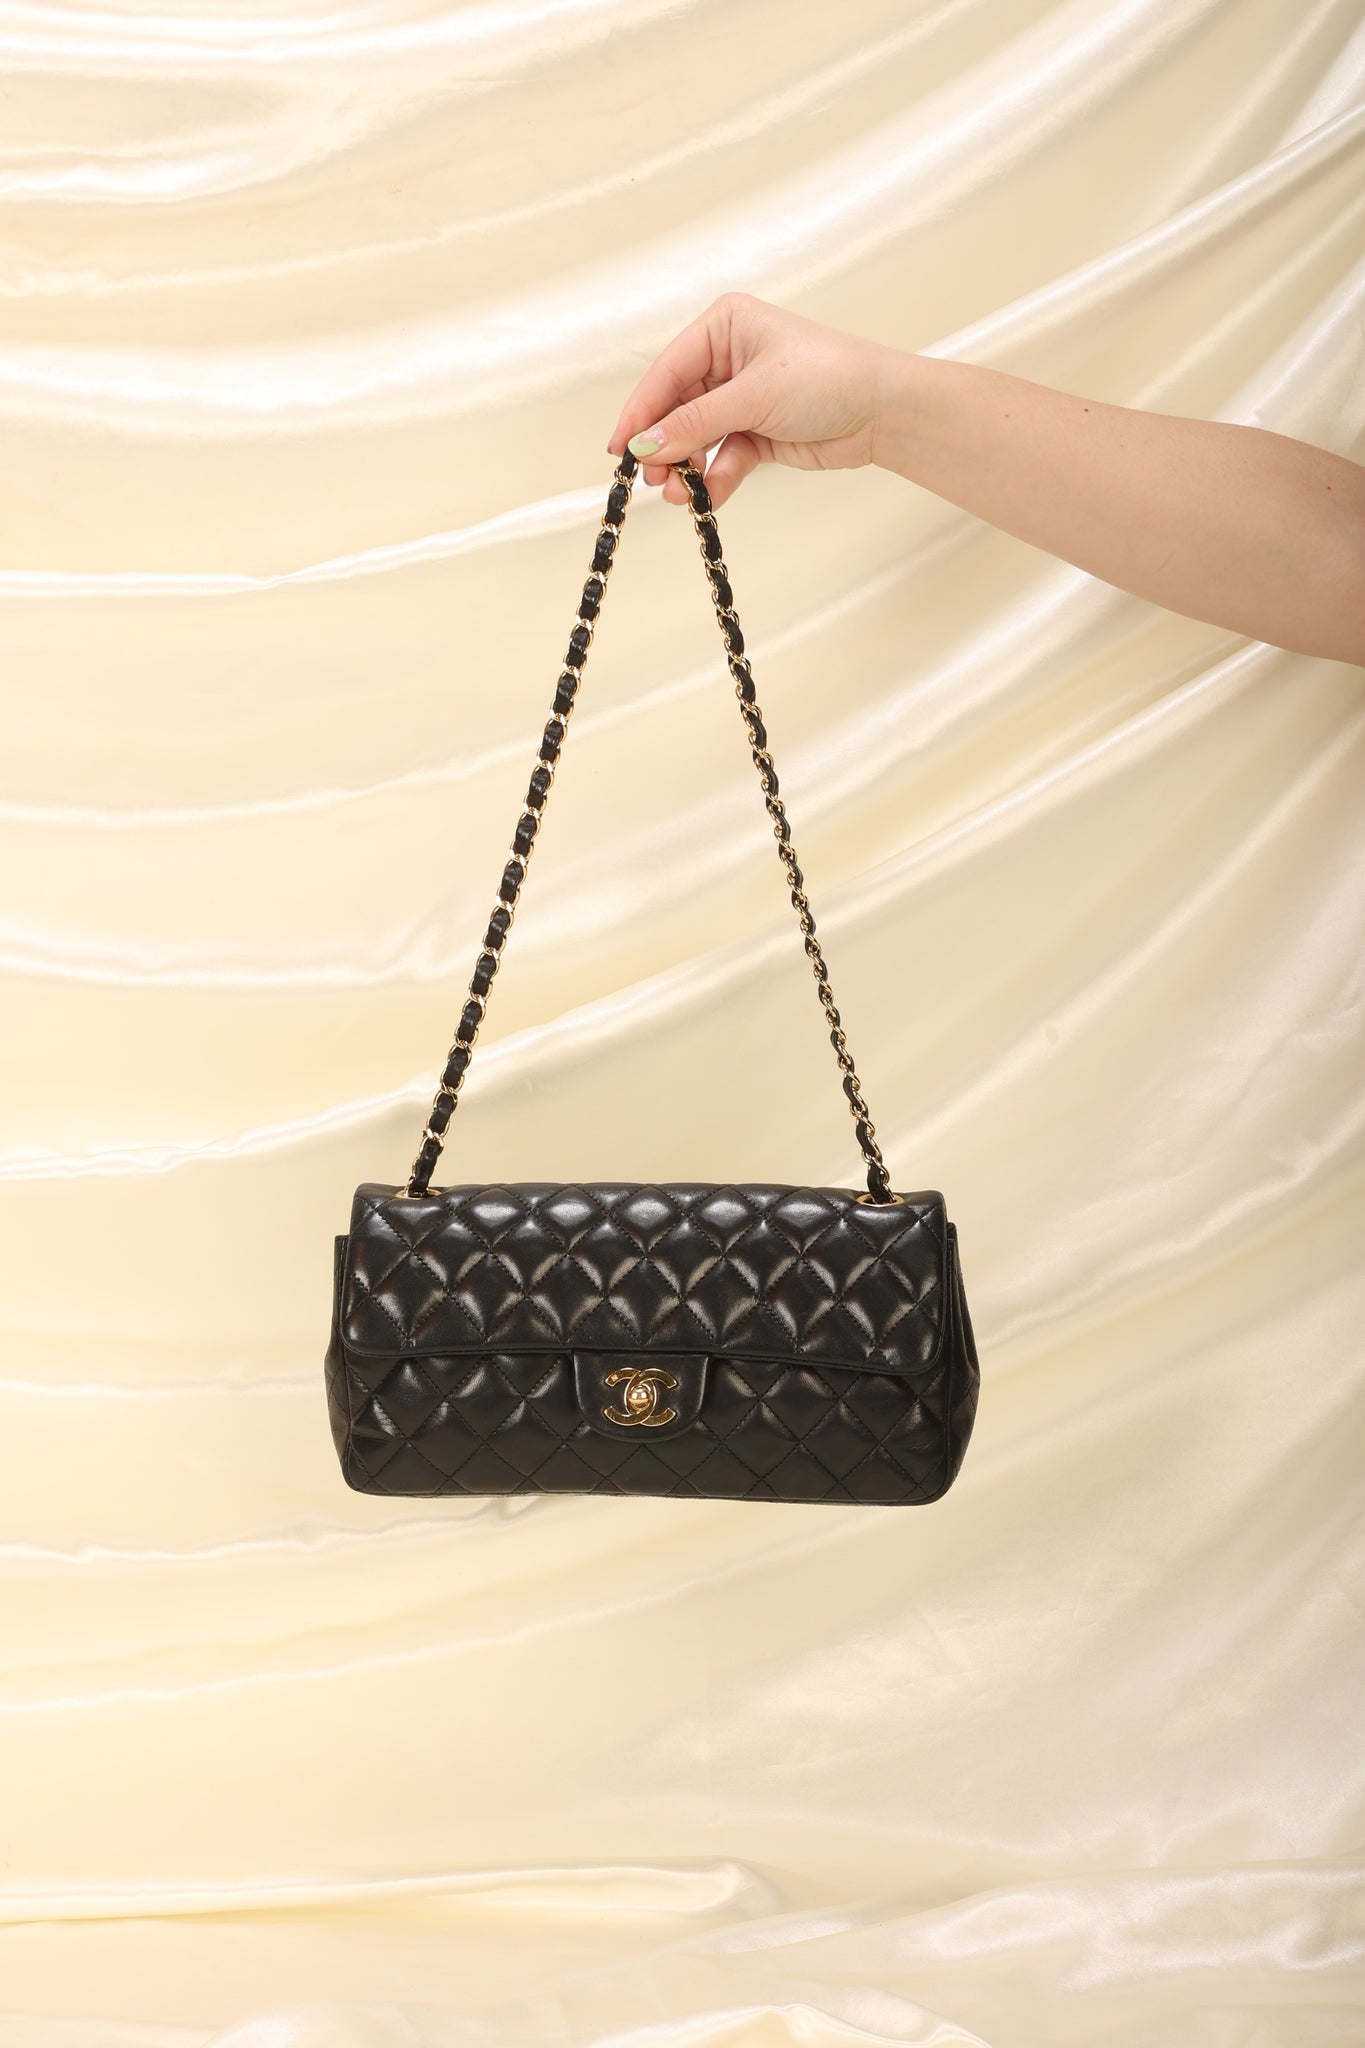 Chanel Black Caviar Leather East/West Classic Quilted Flap Bag at